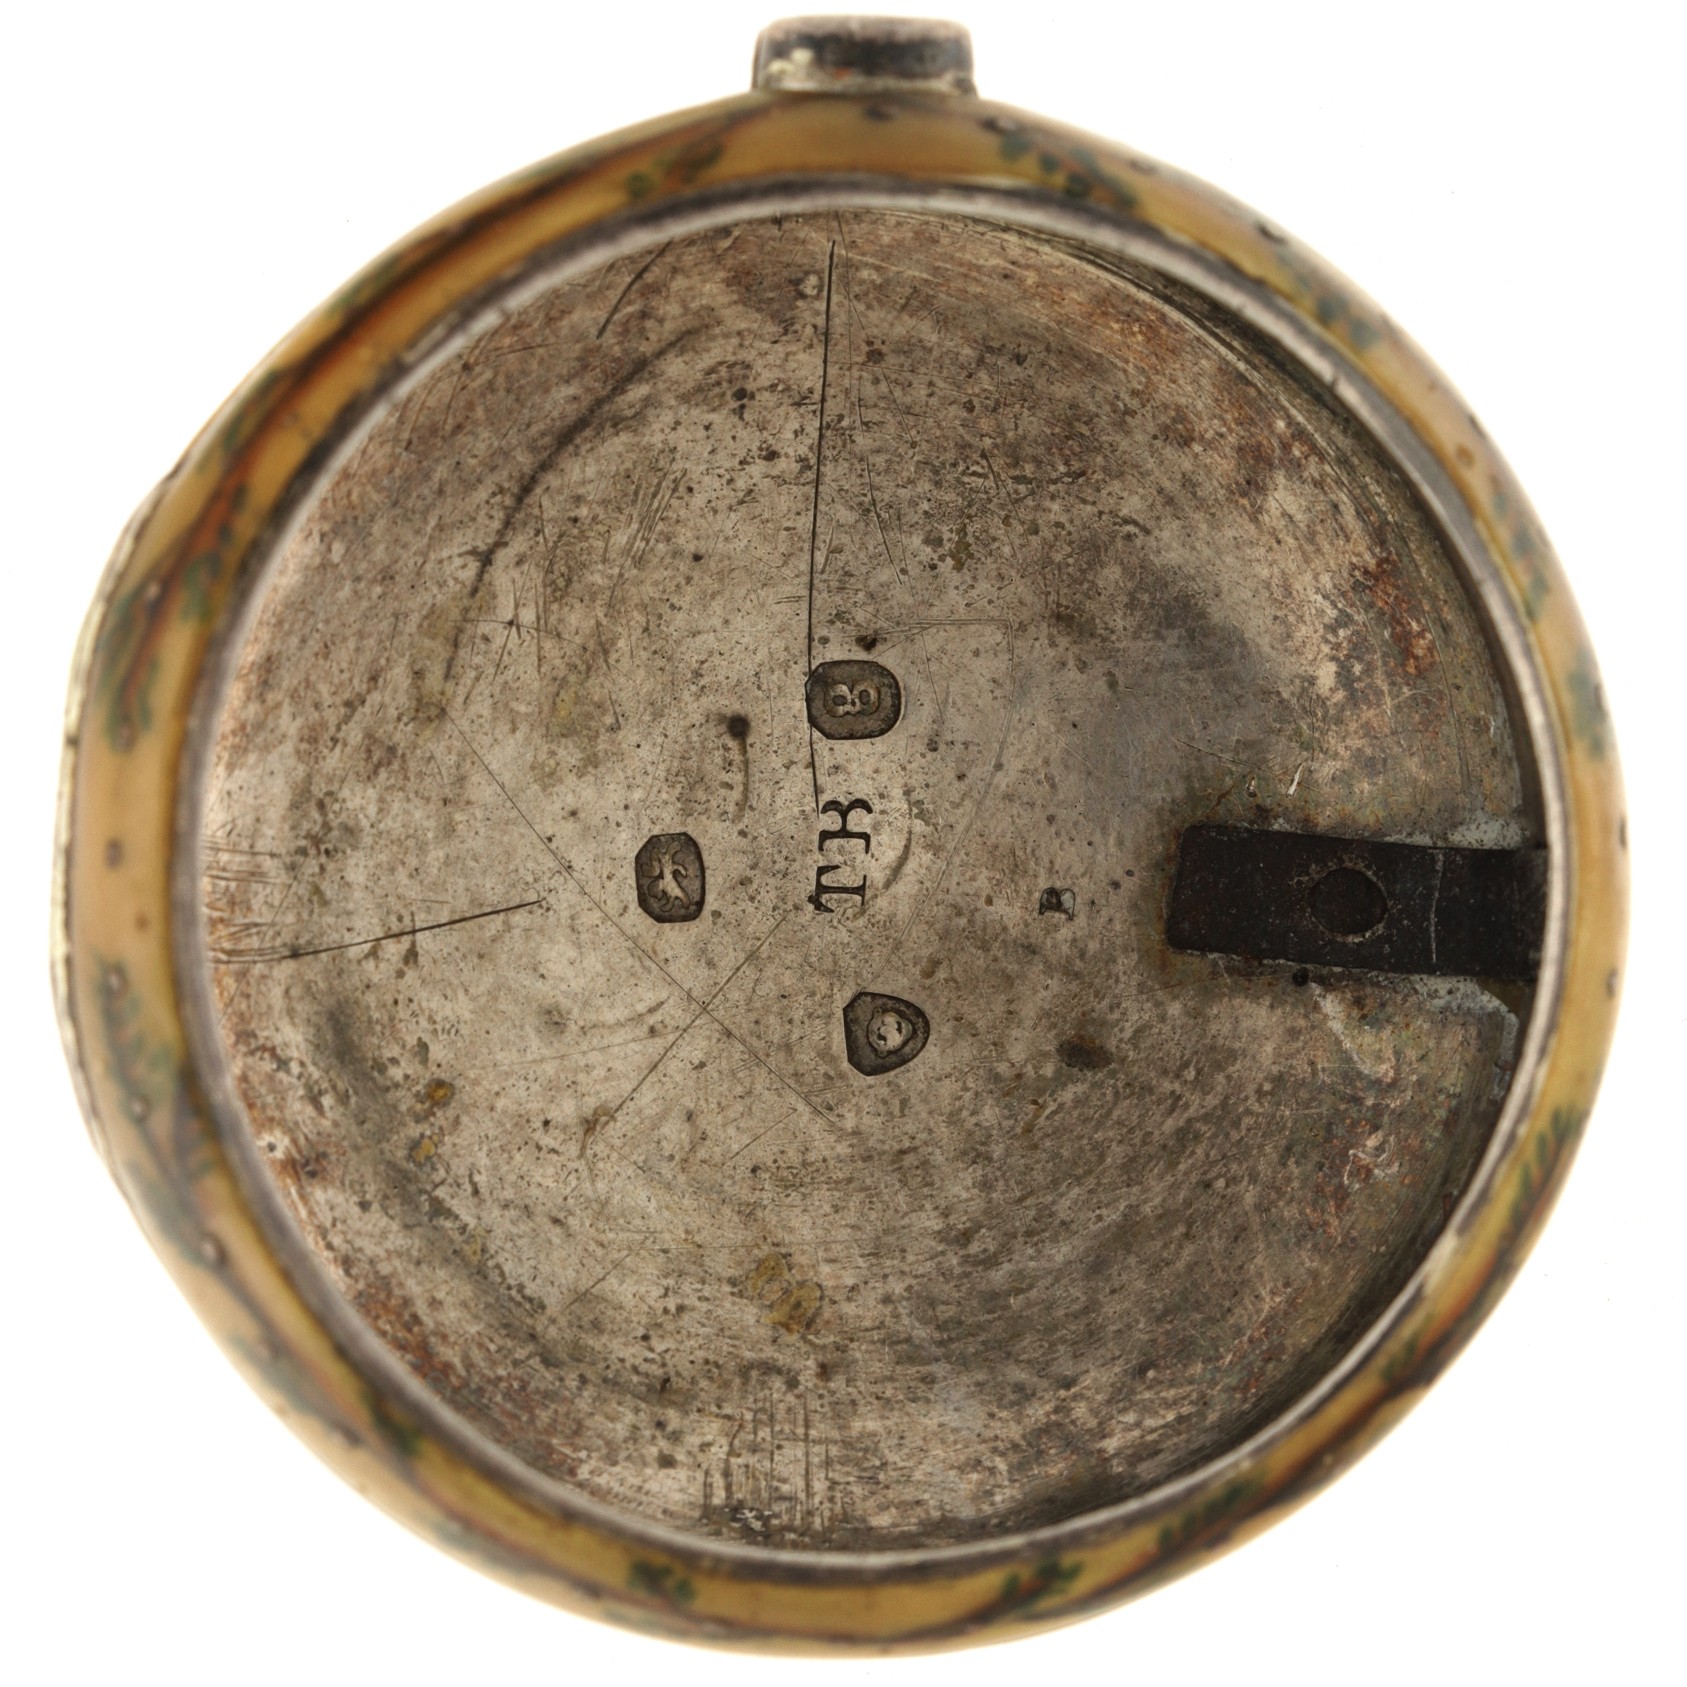 No Reserve - 'Huntercase' Silver (925/1000) - pocket watch case - approx. 1822, London. - Image 3 of 3